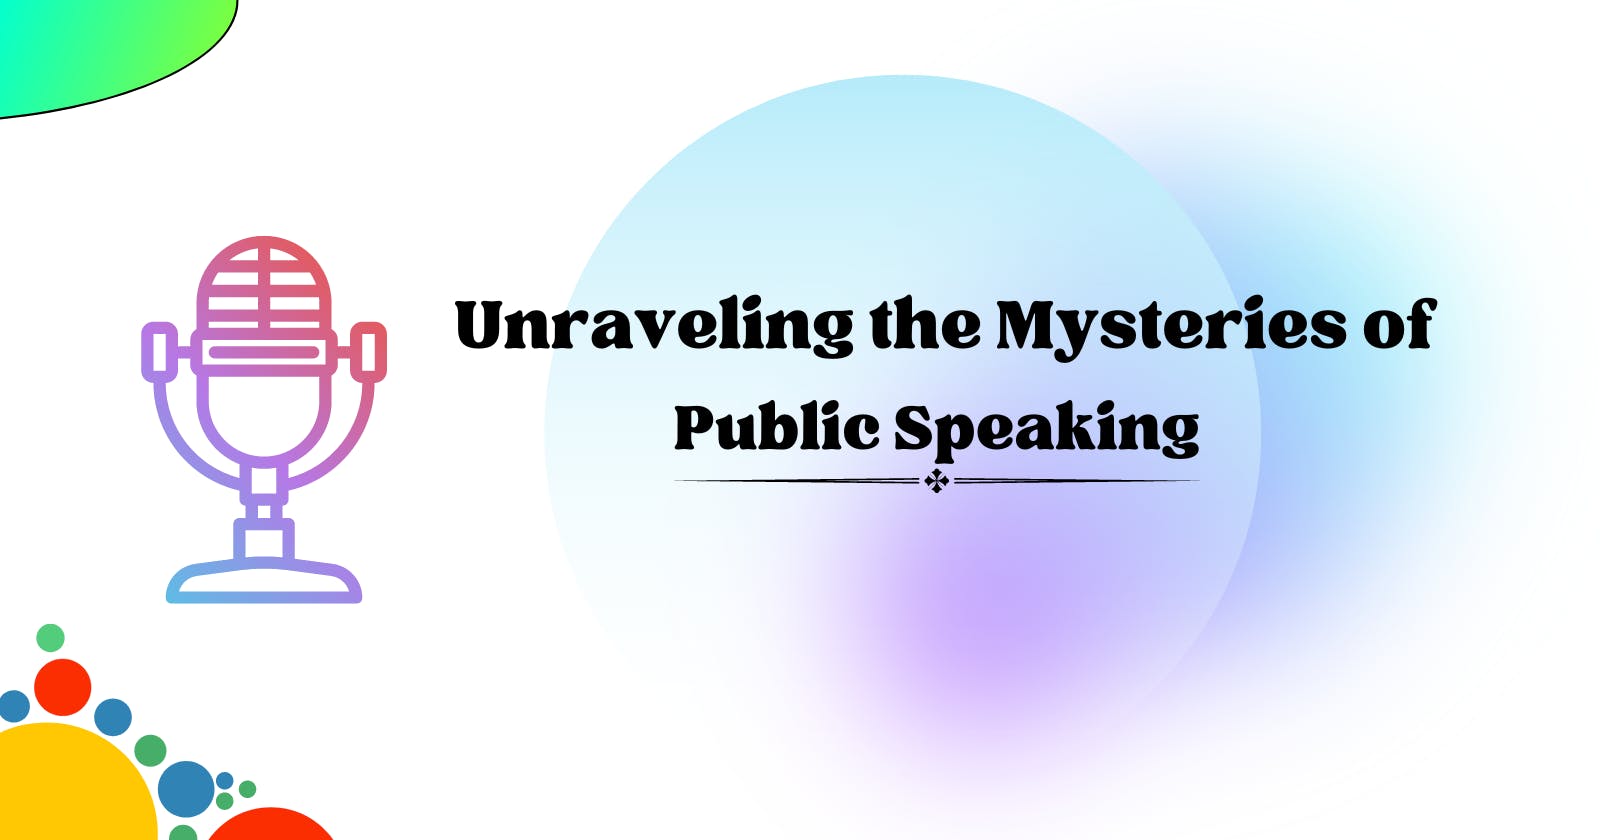 Unraveling the Mysteries of Public Speaking